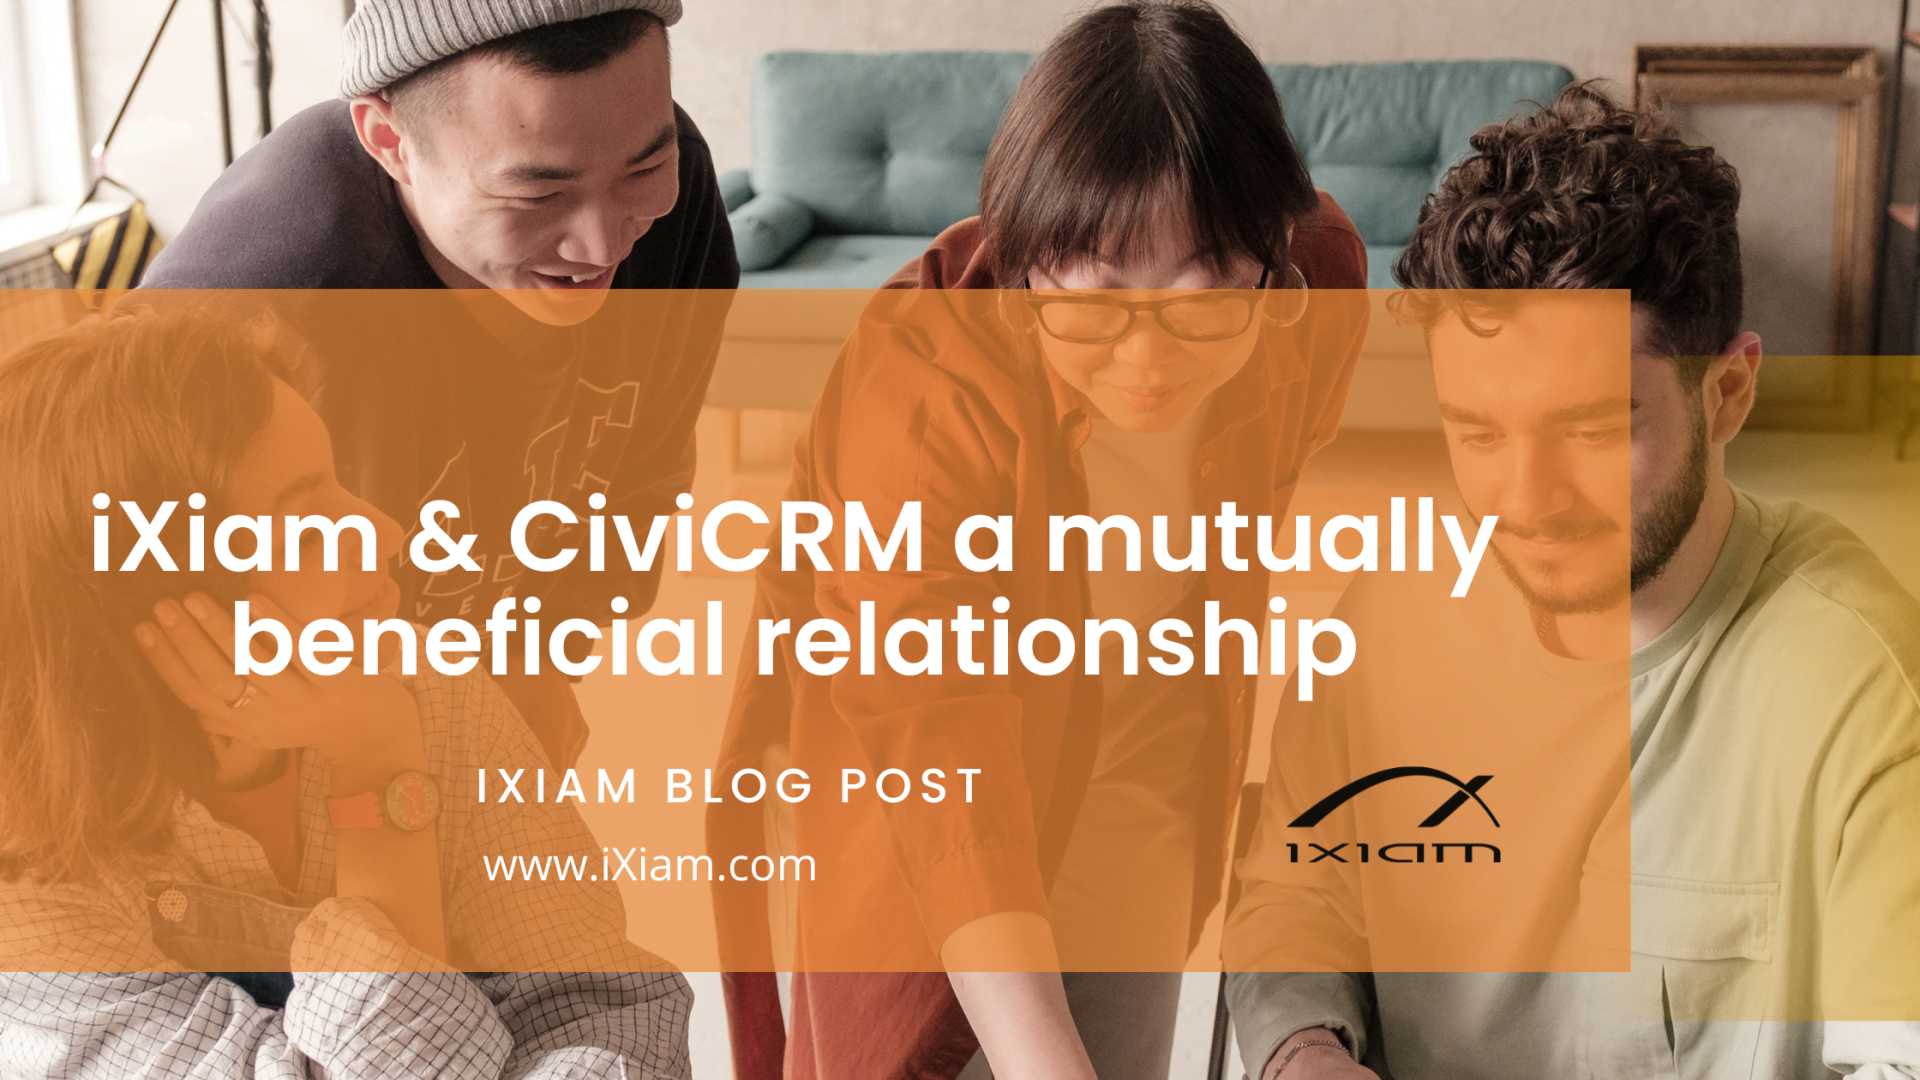 iXiam and CiviCRM collaborate in the continuous improvement of free and open source software that facilitates day-to-day management in nonprofit organizations.